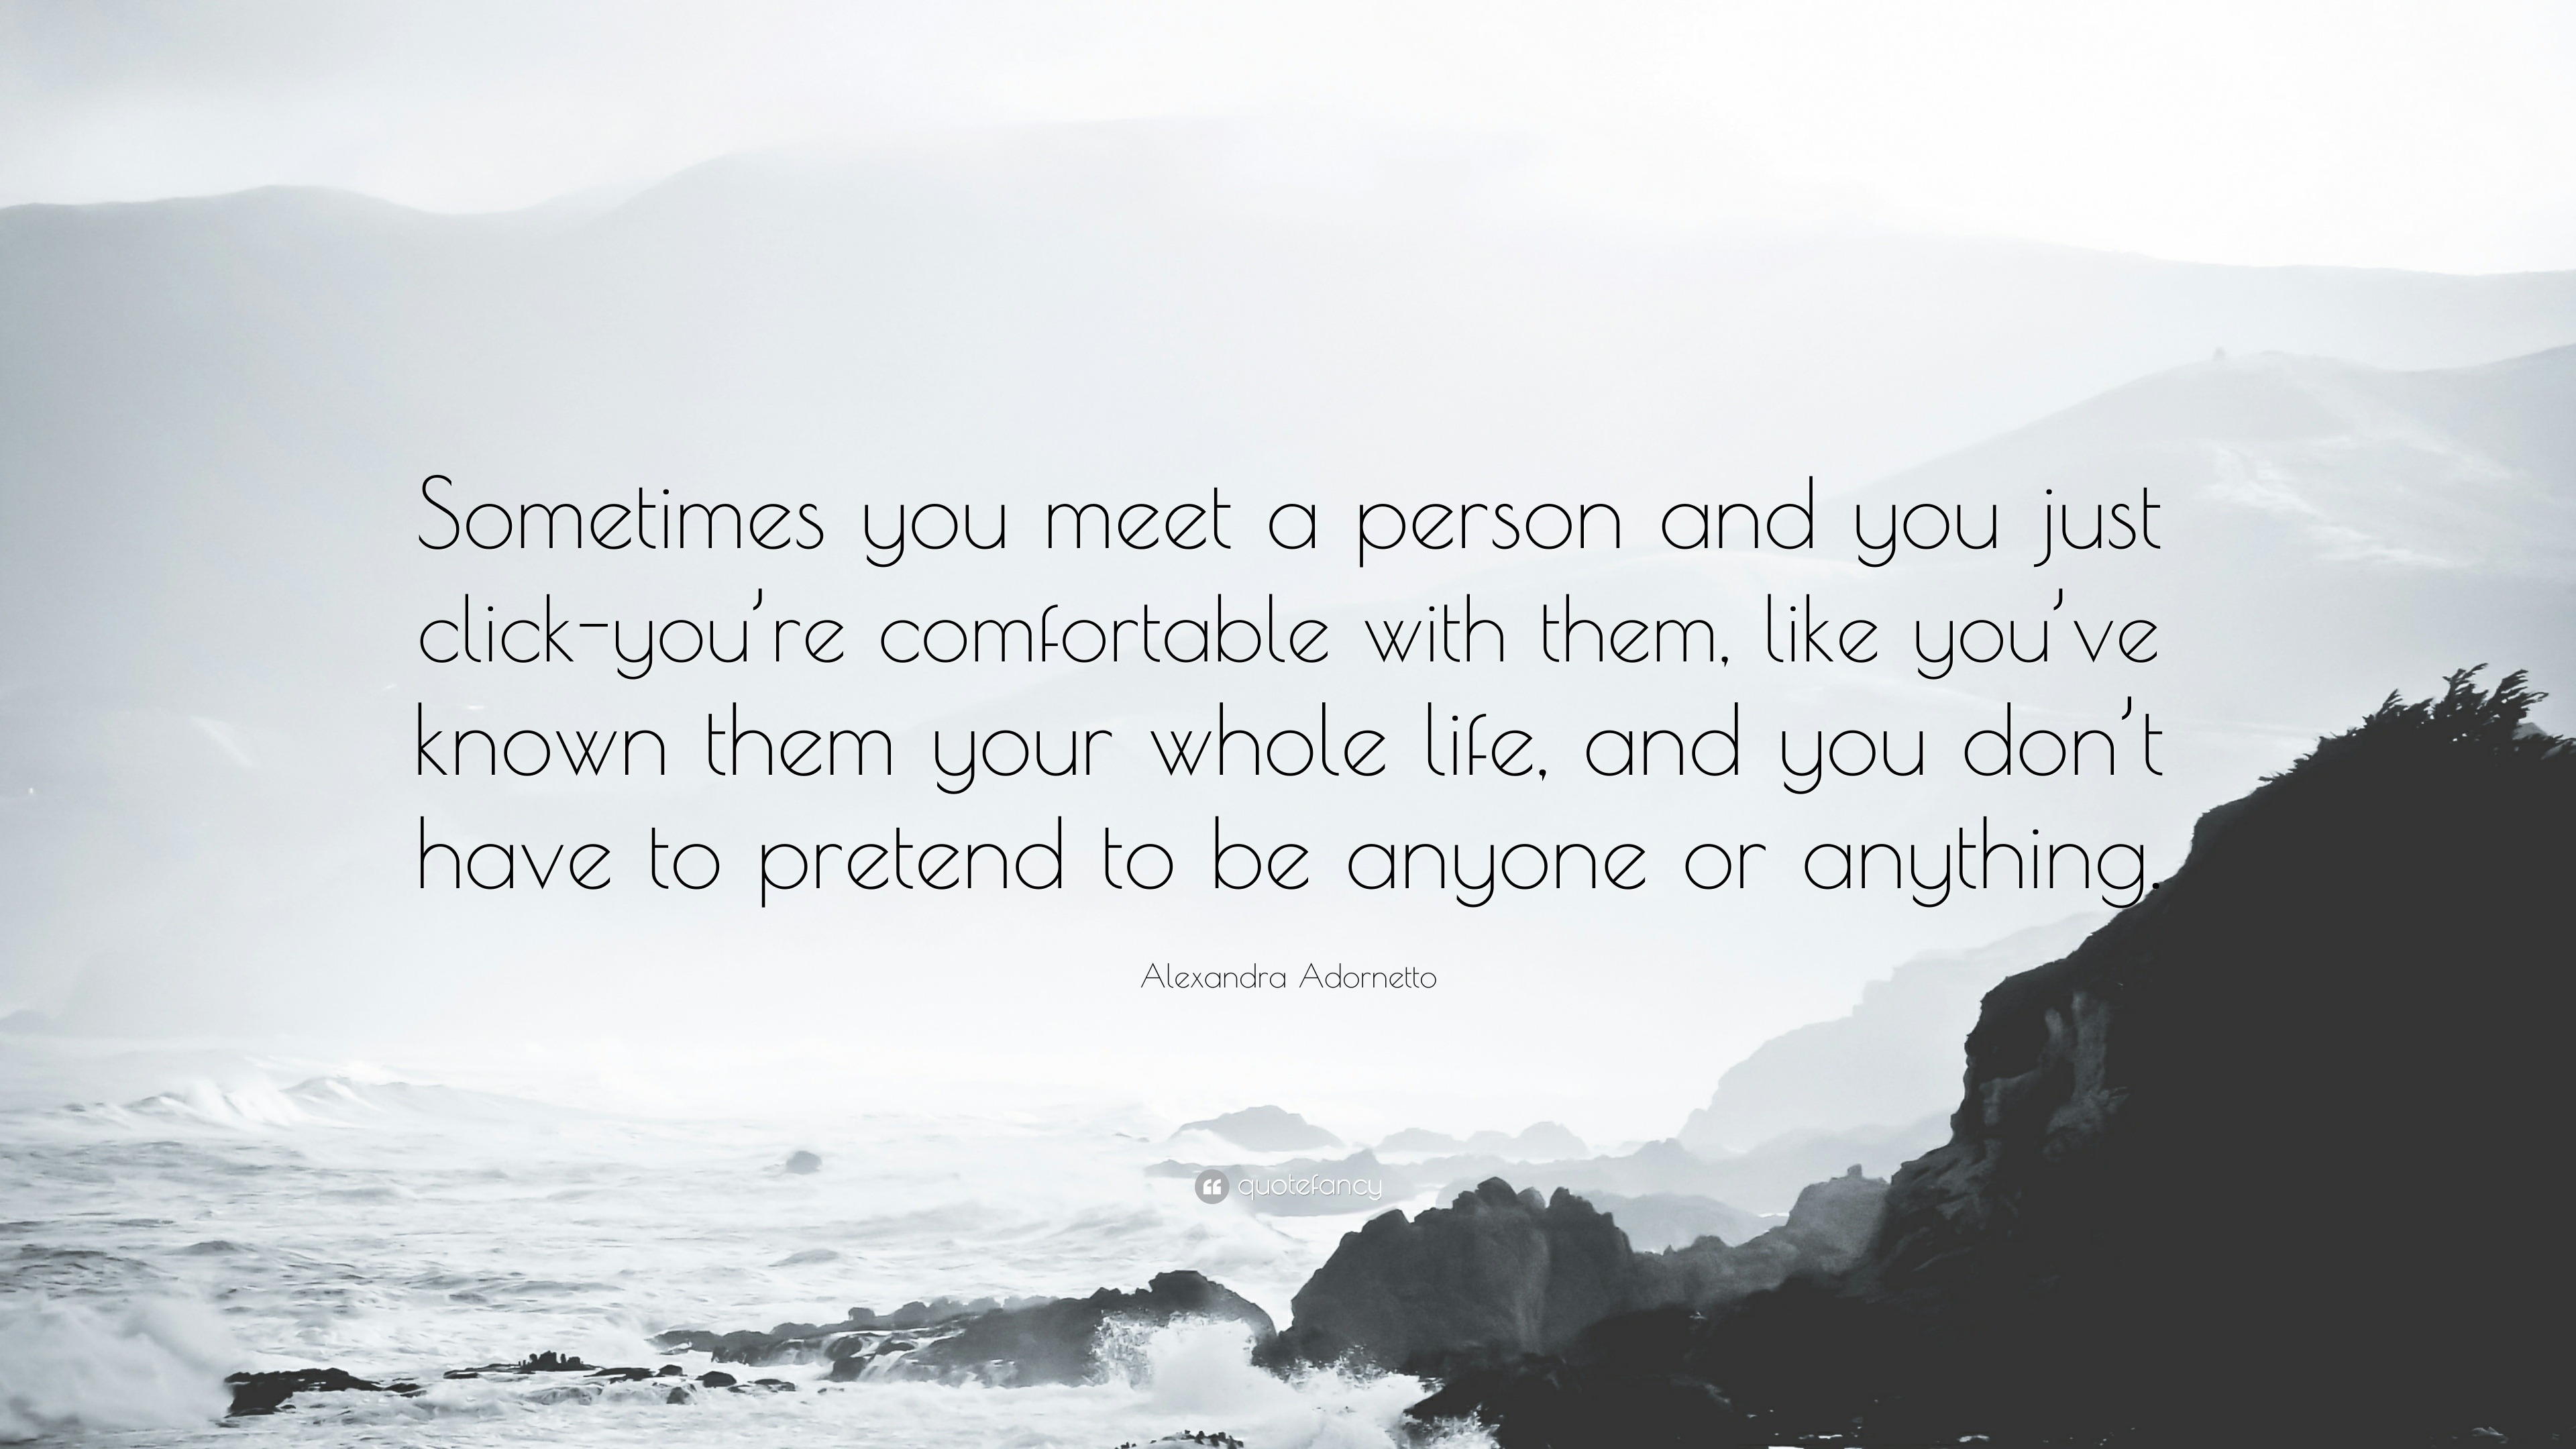 Alexandra Adornetto Quote: “Sometimes You Meet A Person And You Just Click-You're Comfortable With Them, Like You've Known Them Your Whole Life, And...”